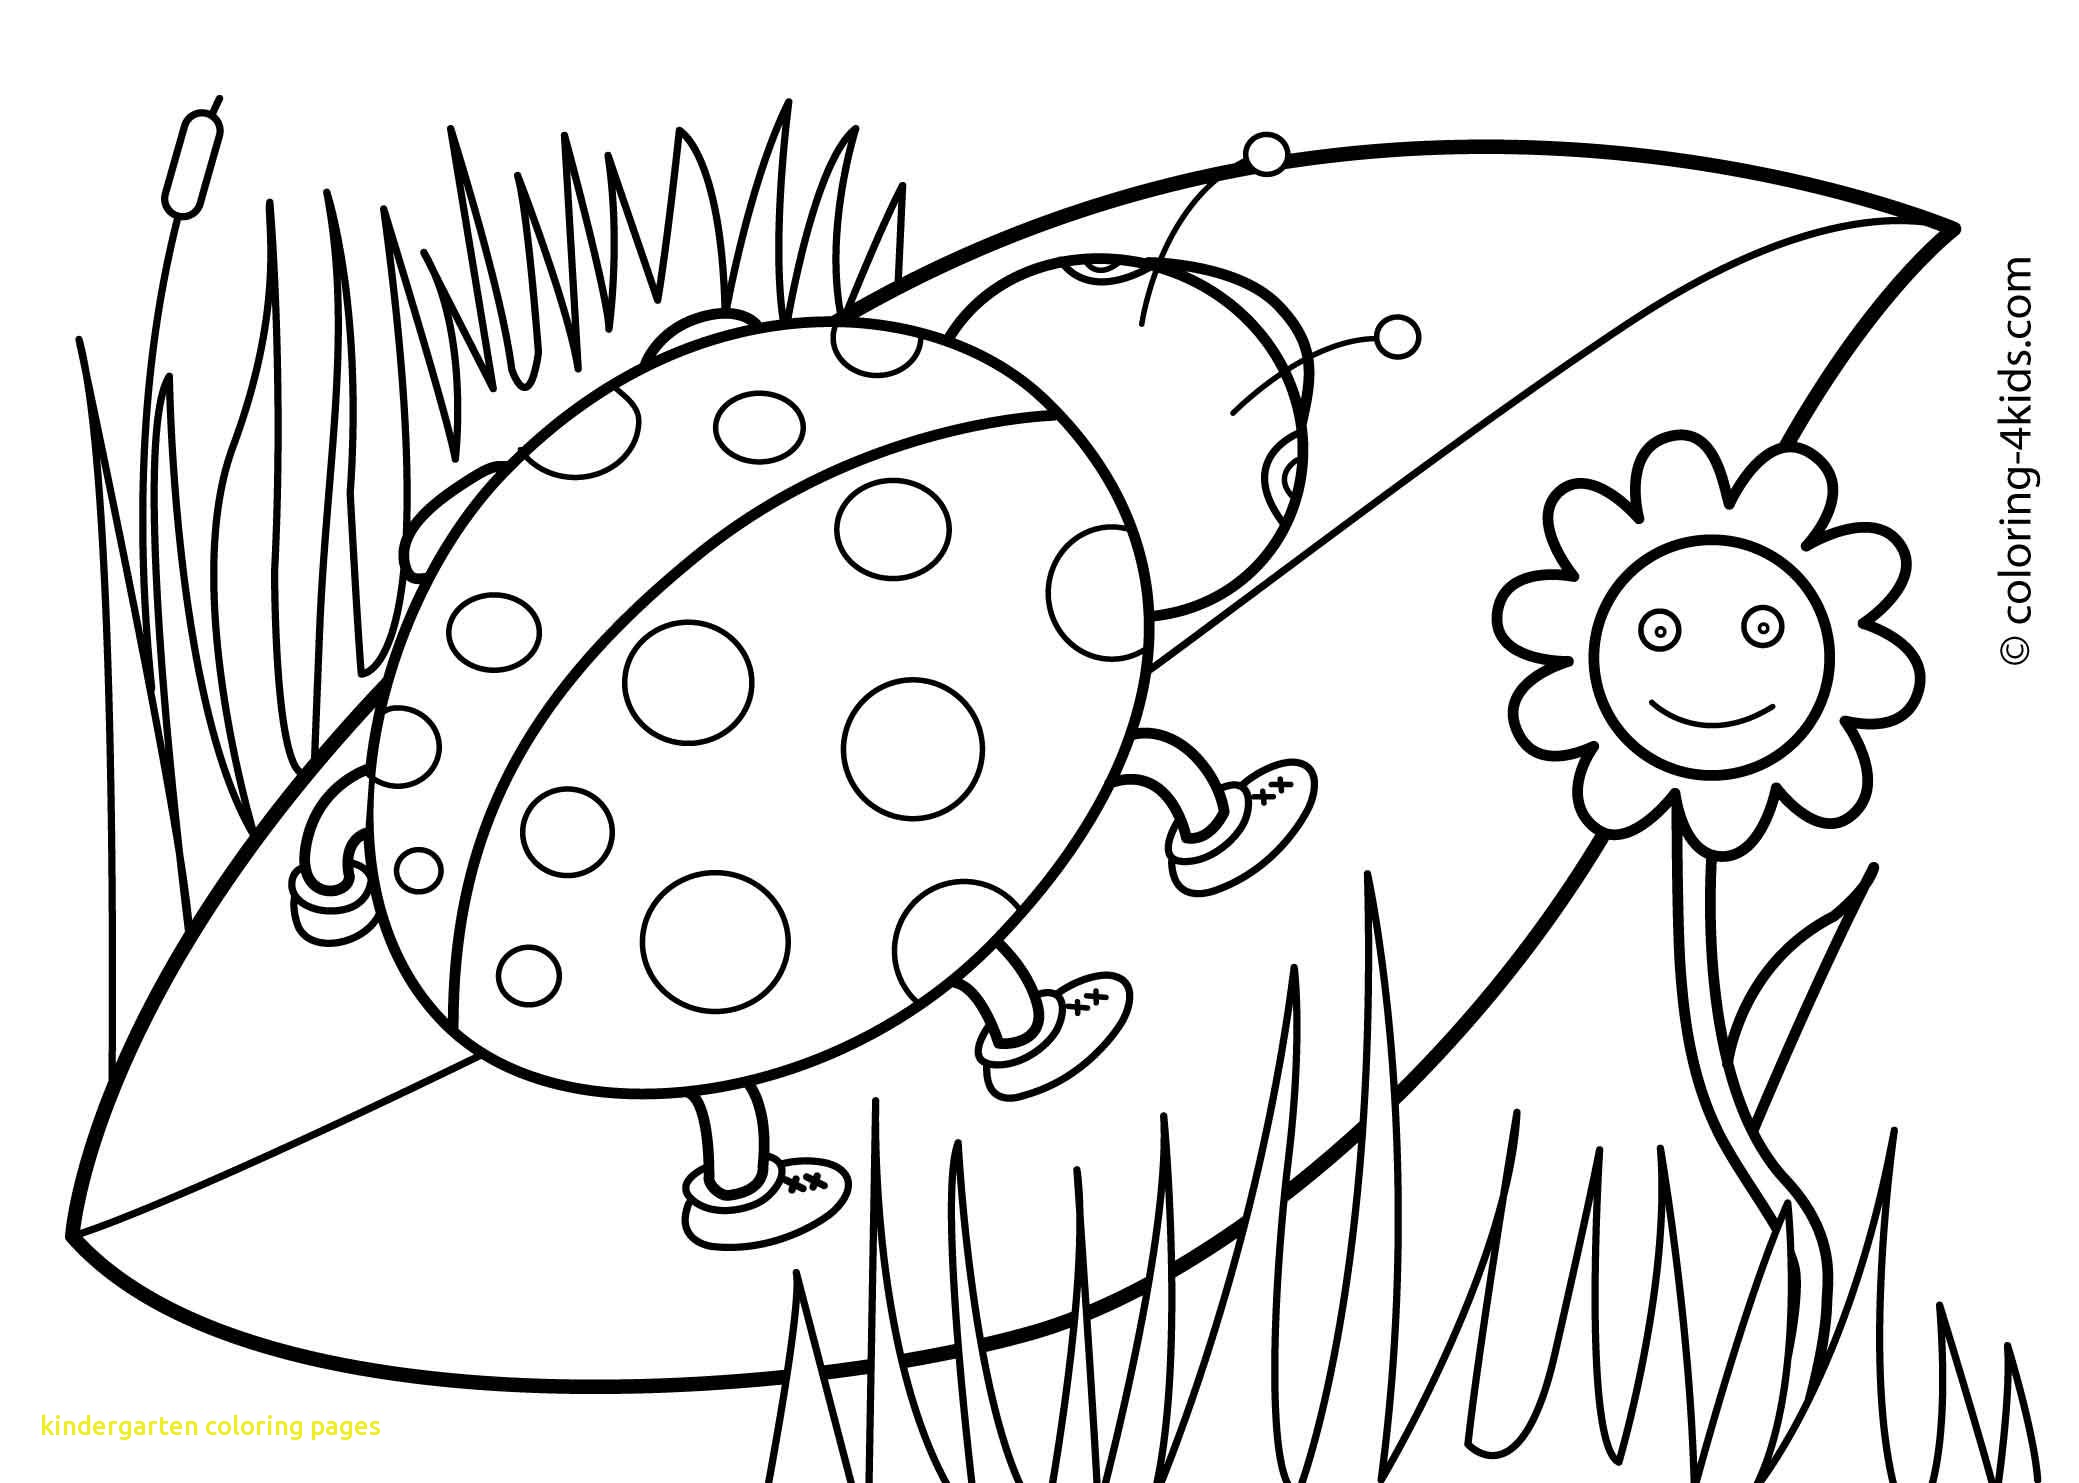 Free Printable Kindergarten Coloring Pages at GetColorings.com | Free